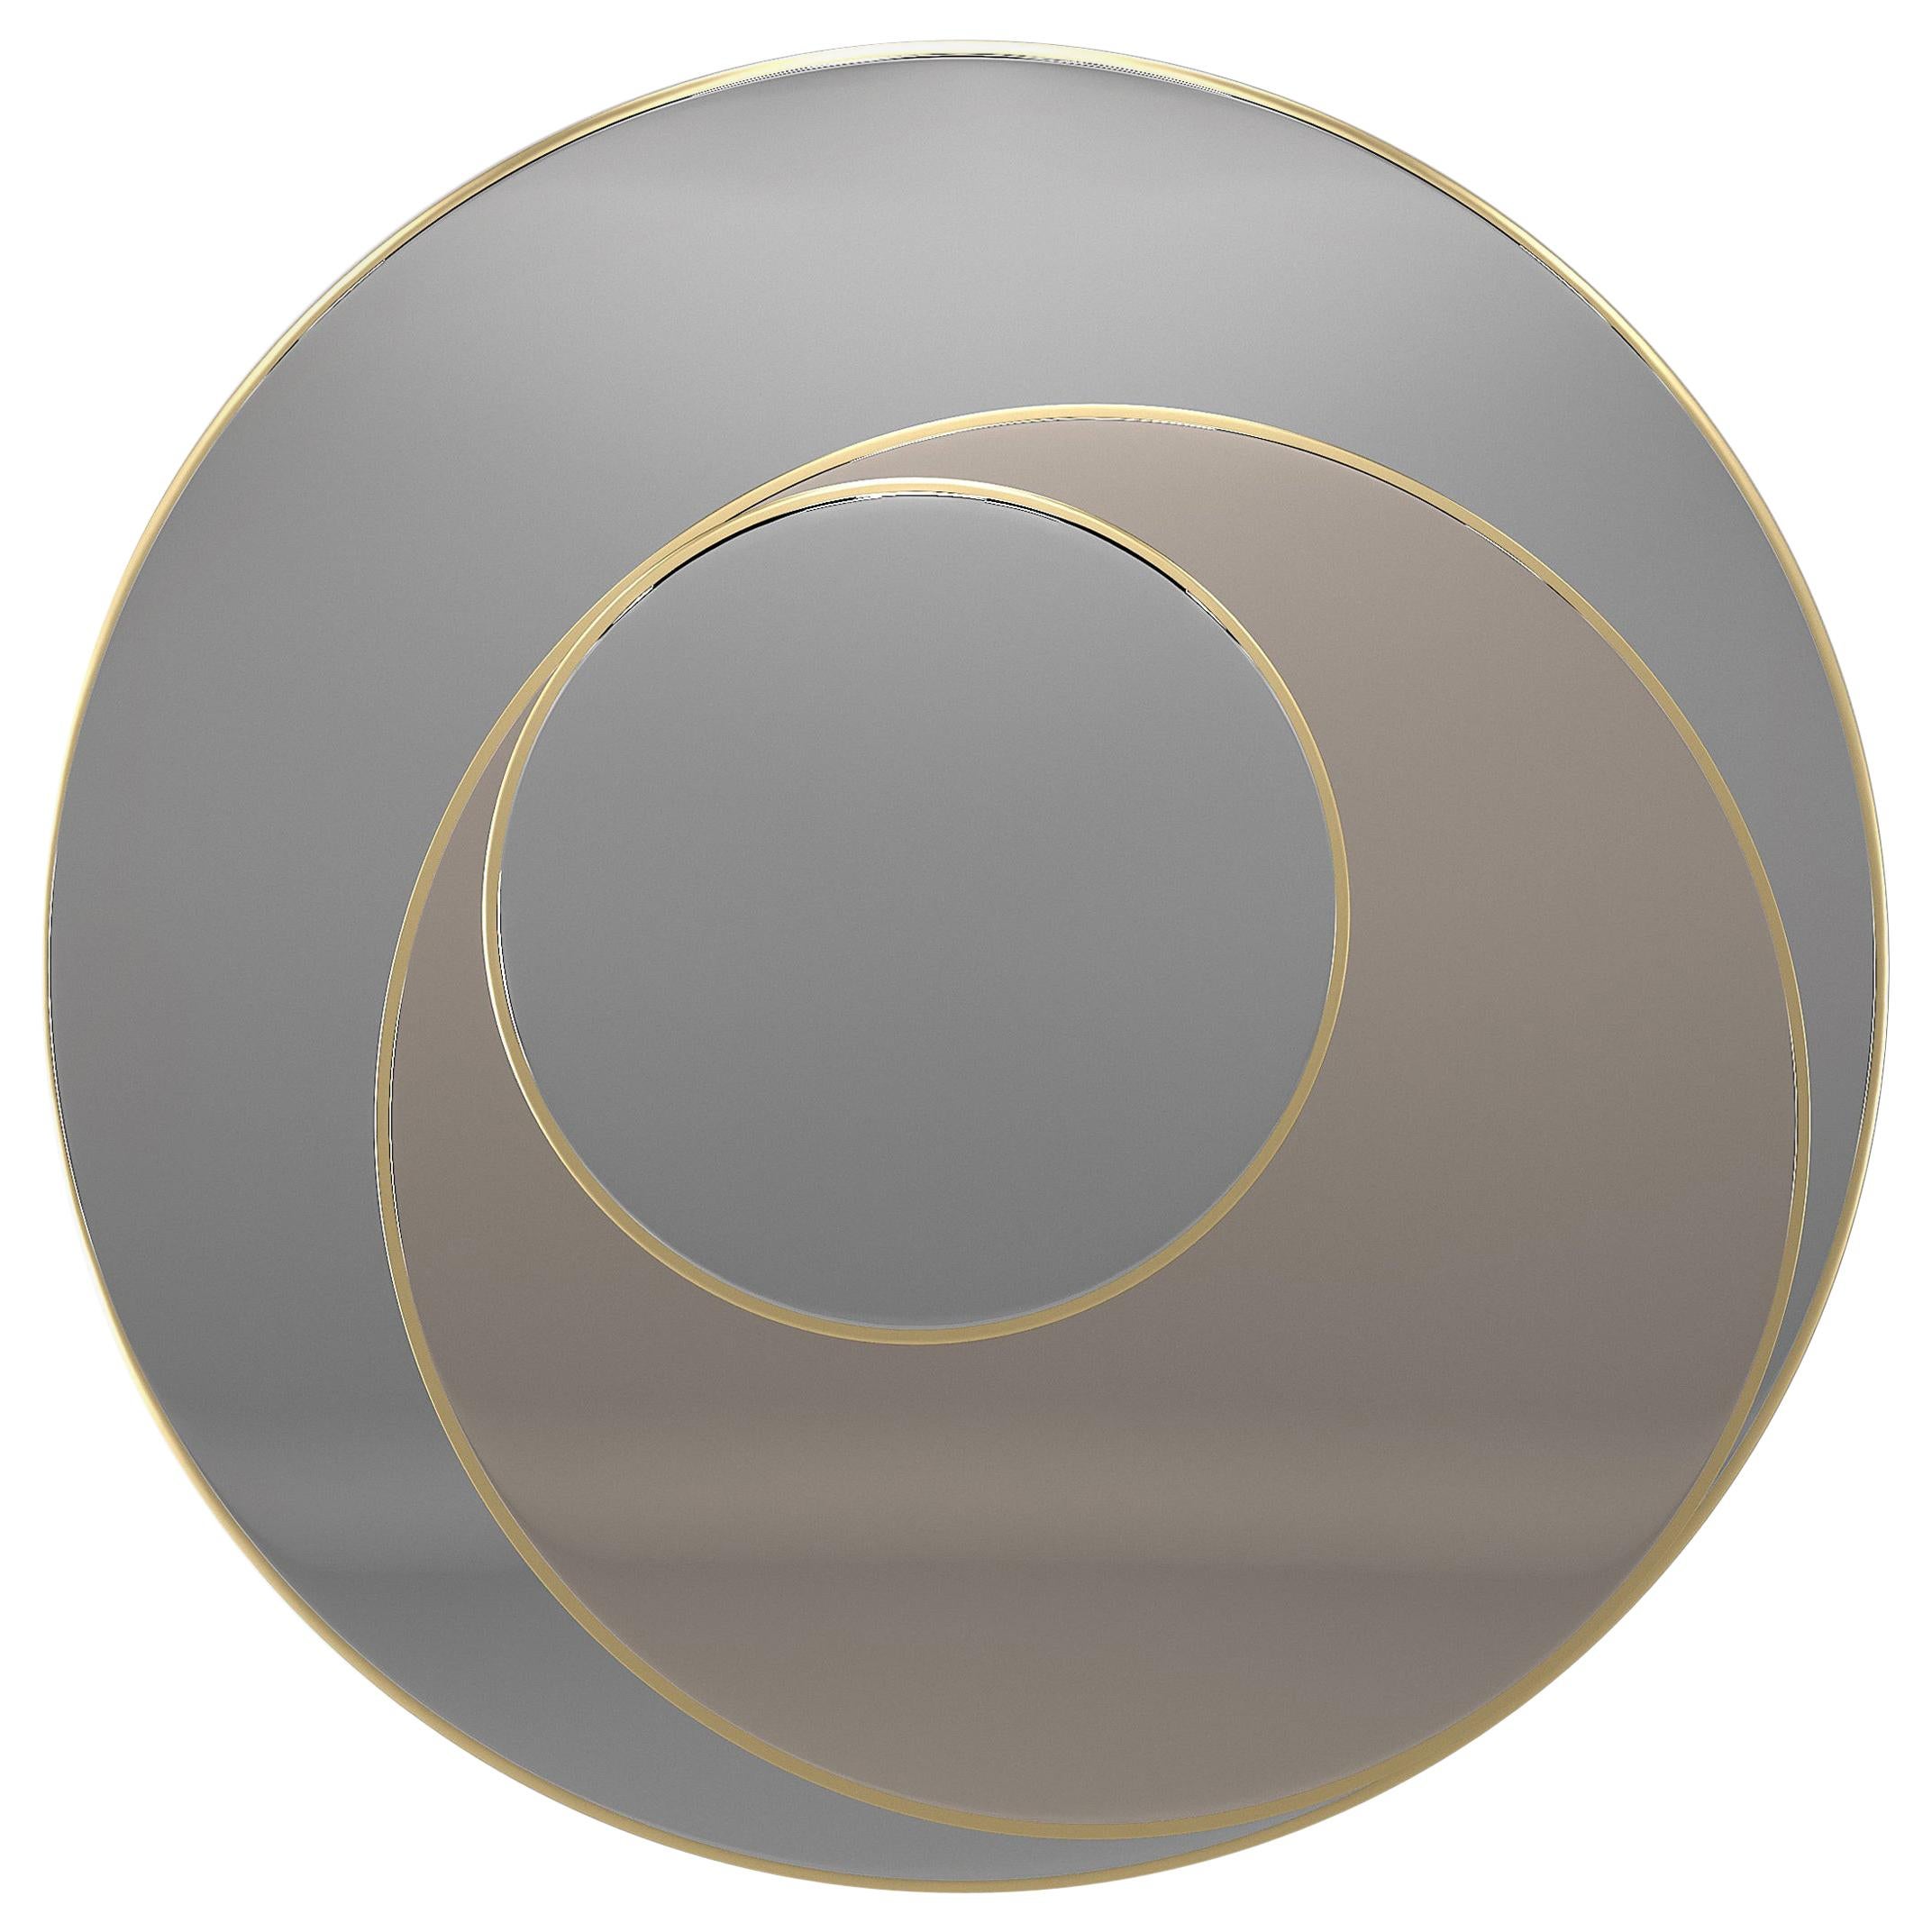 Astro Mirror with Frame in Brushed Brass Color with Bronze and Natural Mirrors